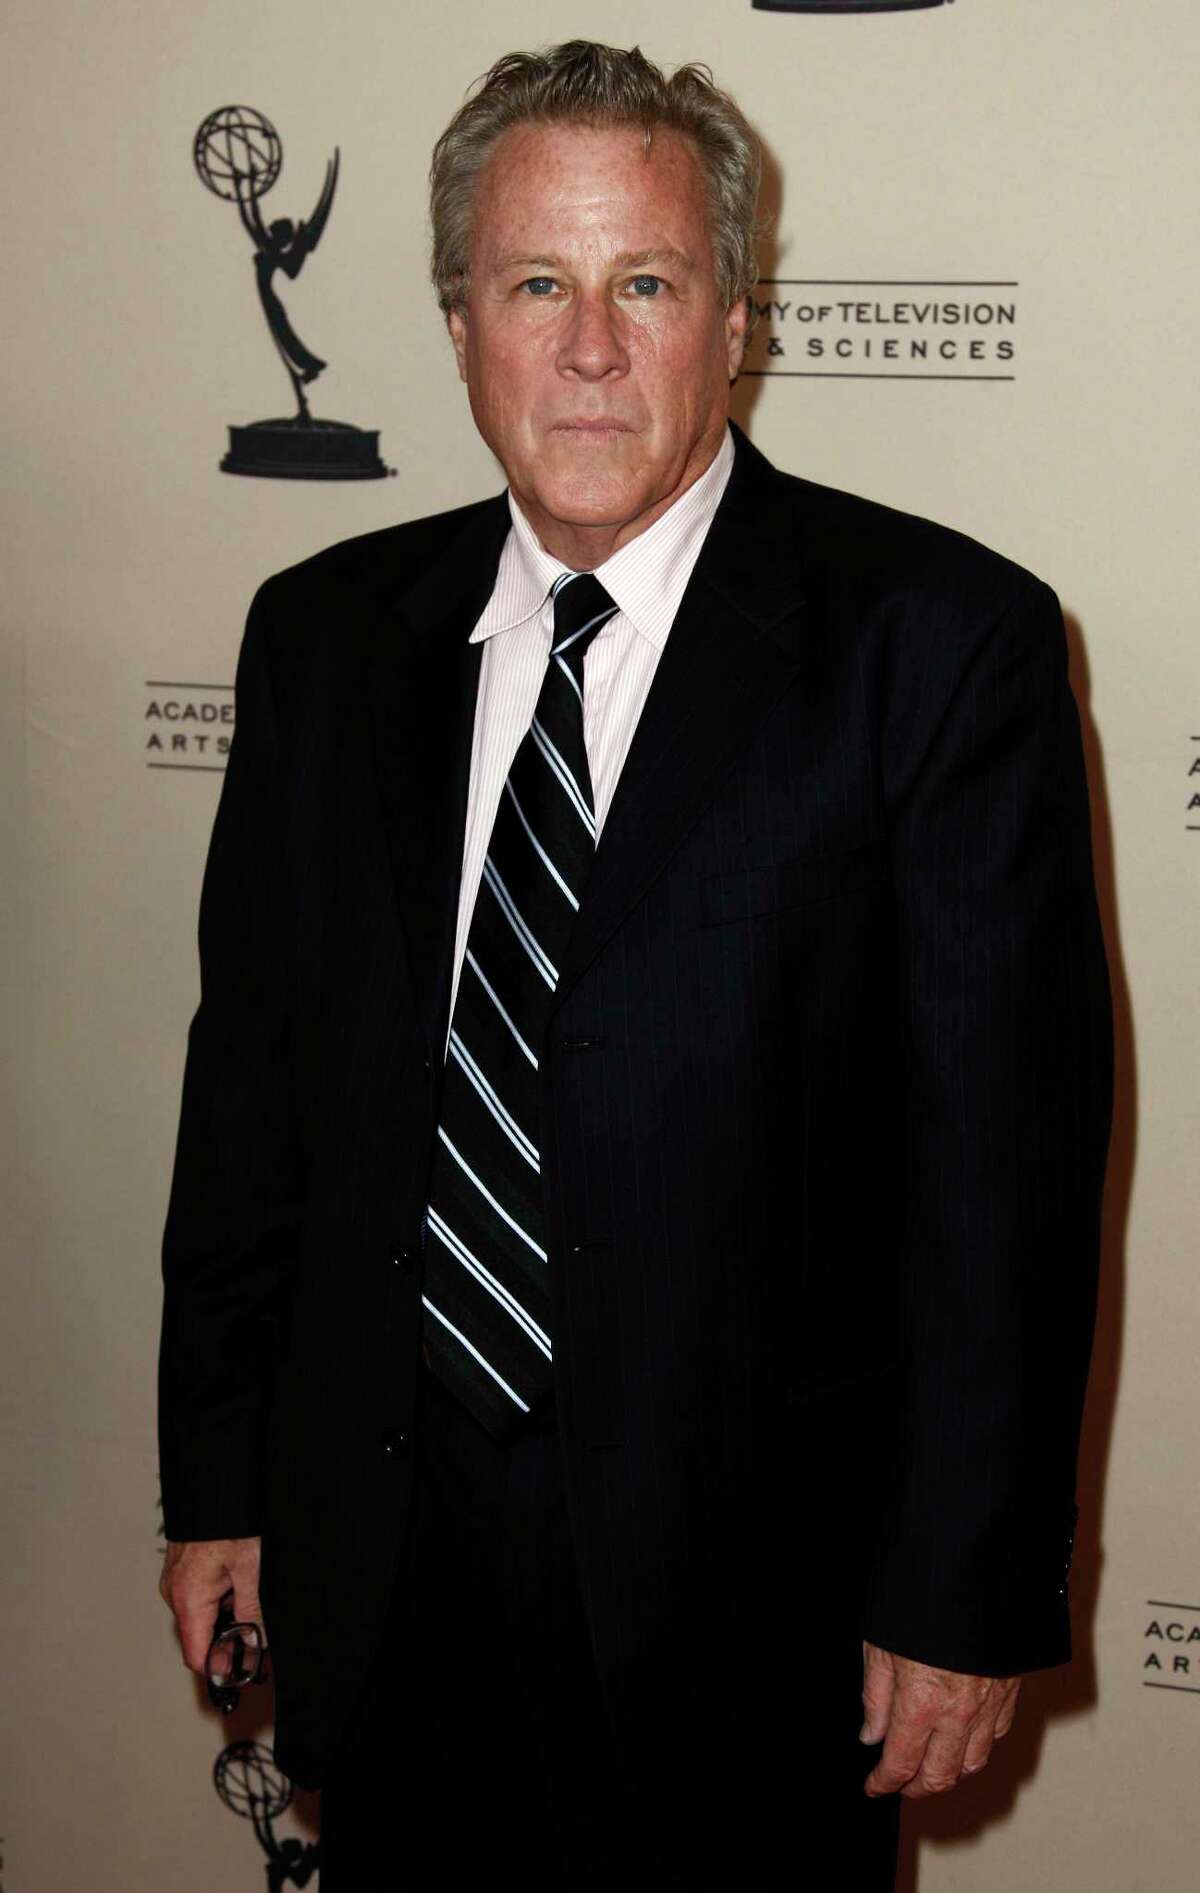 FILE - In this Sept. 12, 2011 file photo, actor John Heard arrives at Academy of Television Arts and Sciences Producers Peer Group celebration of the 63rd Primetime Emmy Awards in Los Angeles. Heard, best known for playing the father in the Â?“Home AloneÂ?” movie series, has died. He was 72. His death was confirmed by the Santa Clara Medical ExaminerÂ?’s office in California on Saturday, July 22, 2017. (AP Photo/Matt Sayles, File)